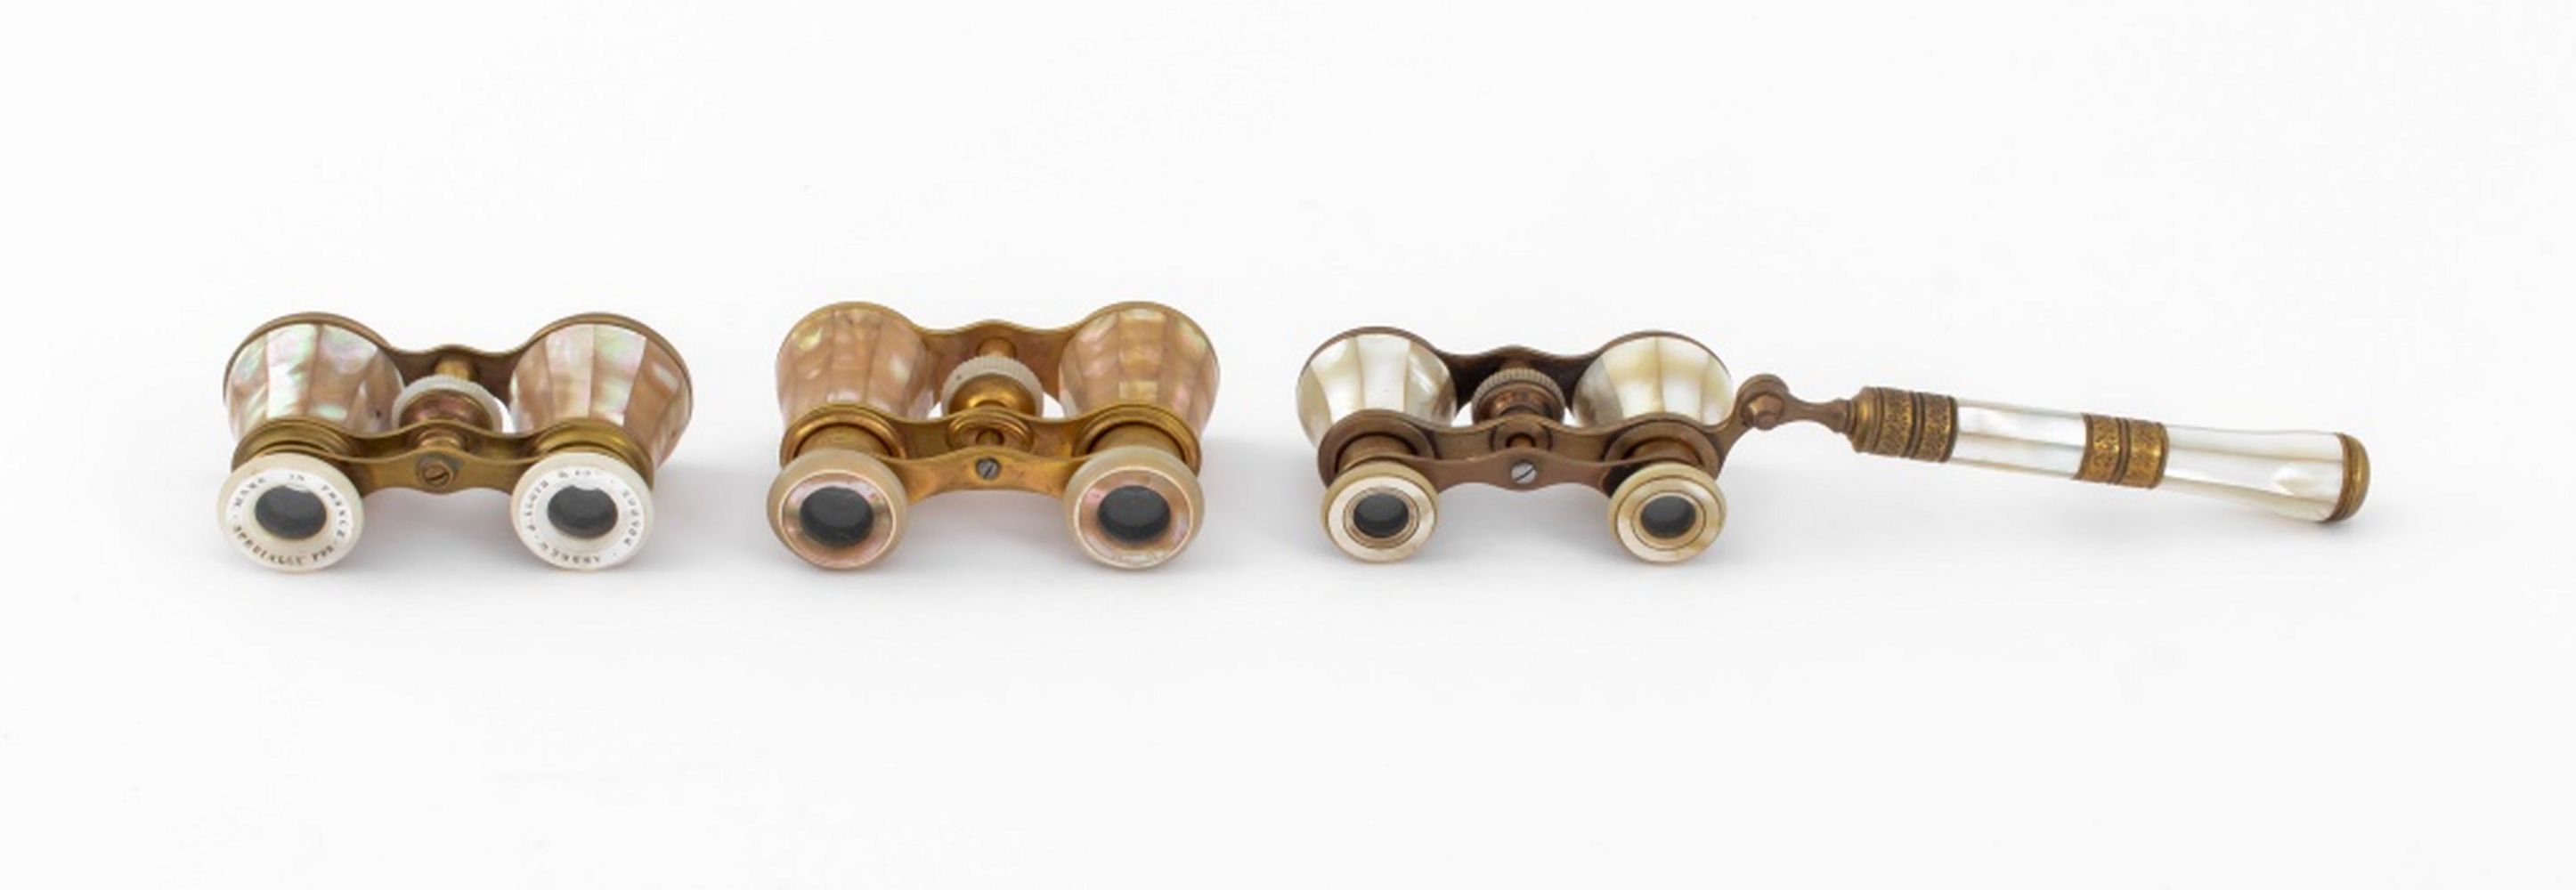 MOTHER OF PEARL OPERA GLASSES  3cebf4